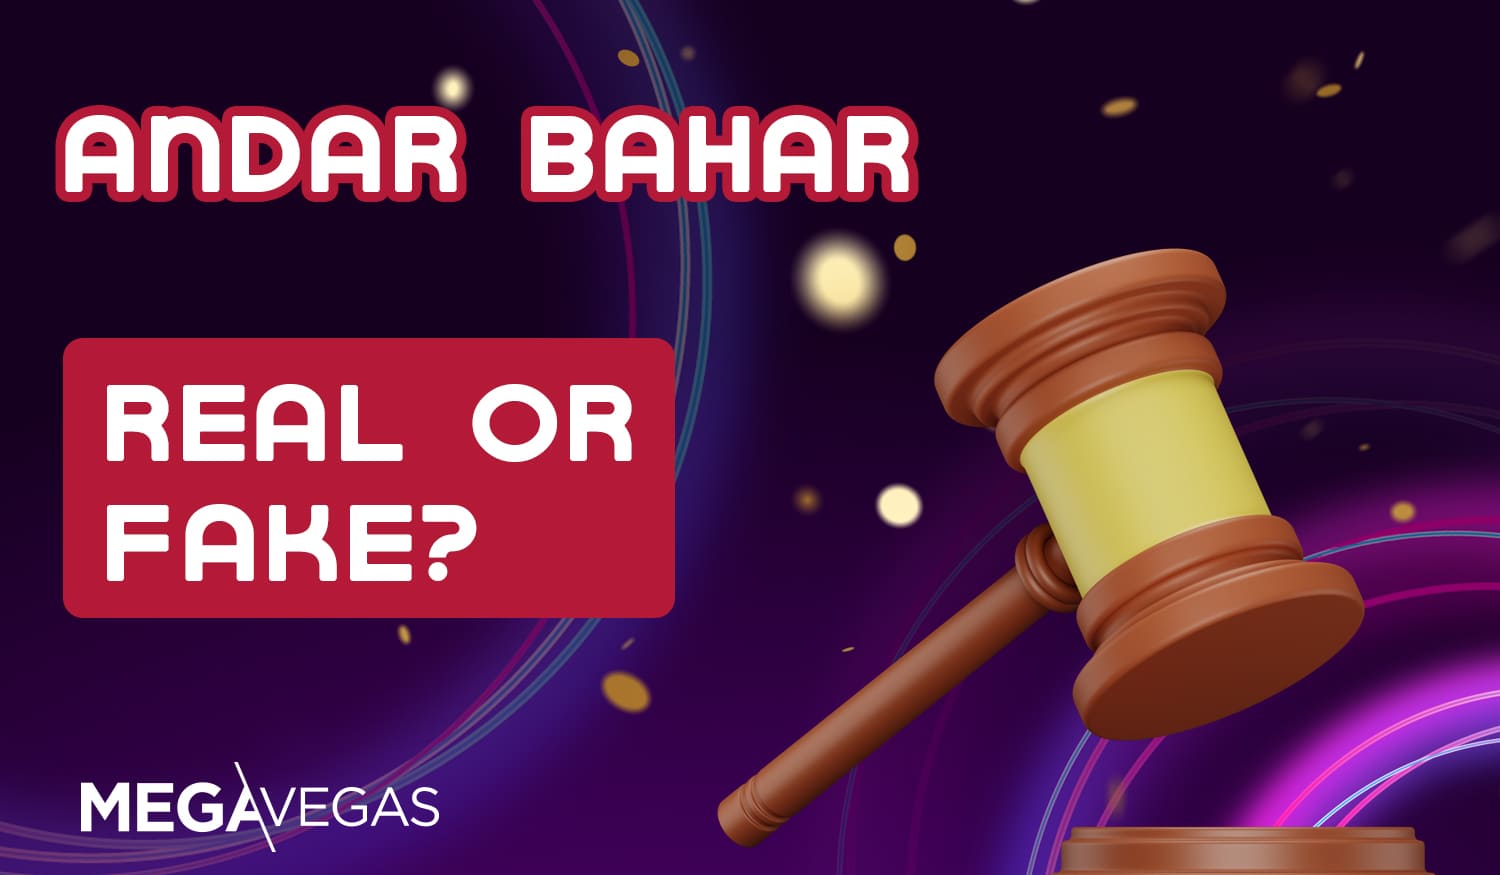 How legal Mega Vegas online casino is for Indian users